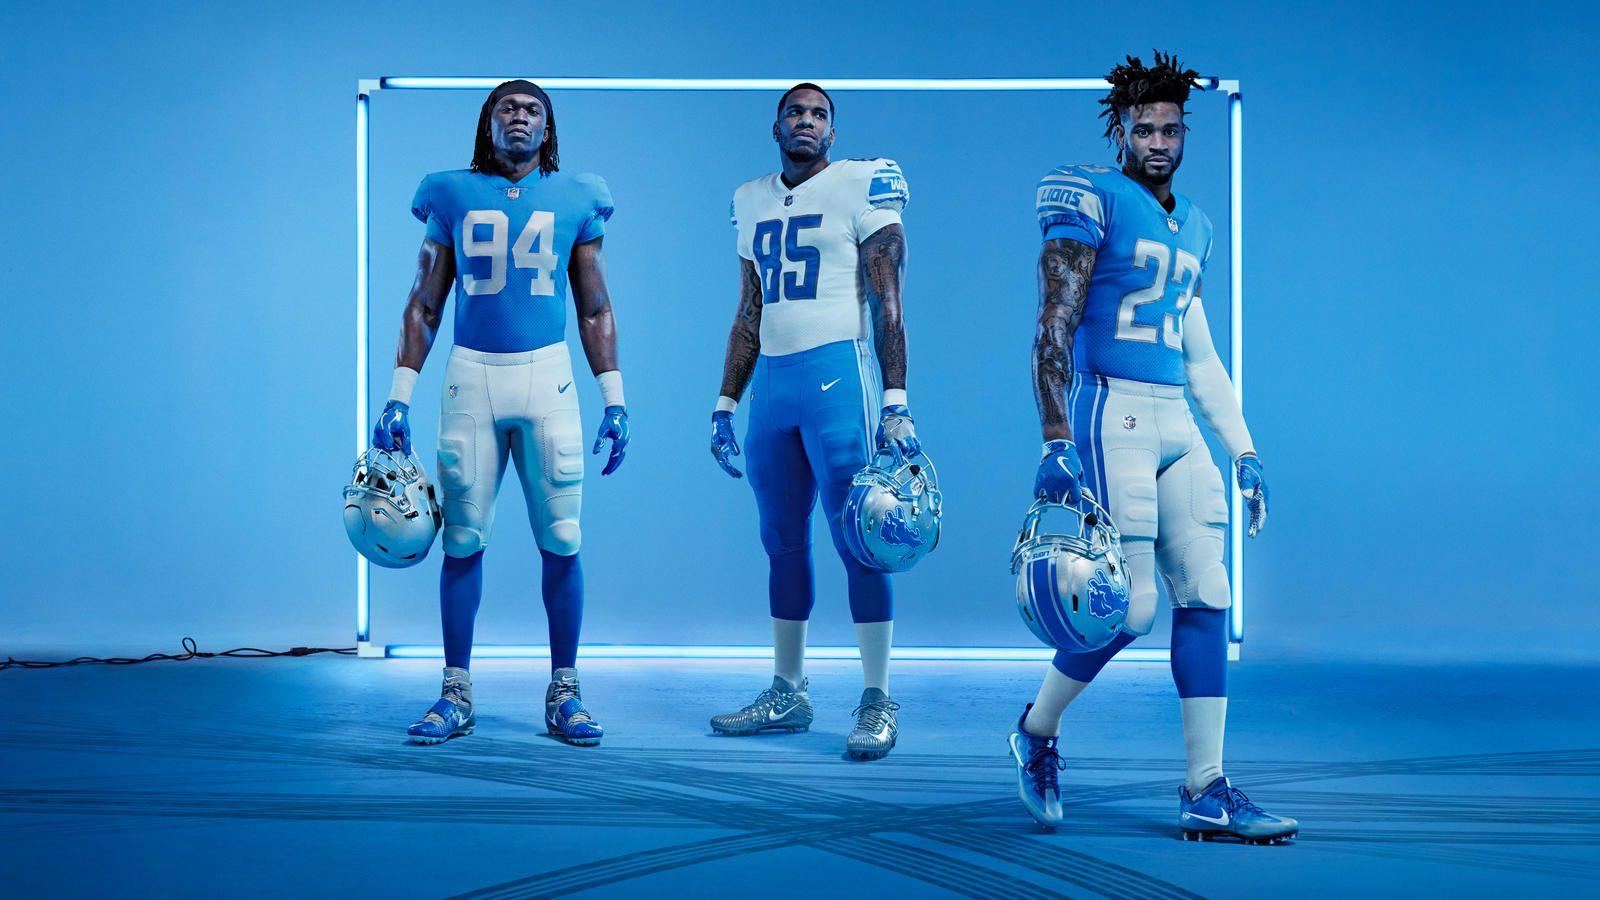 Reasons to Obsess Over the New Lions Uniforms